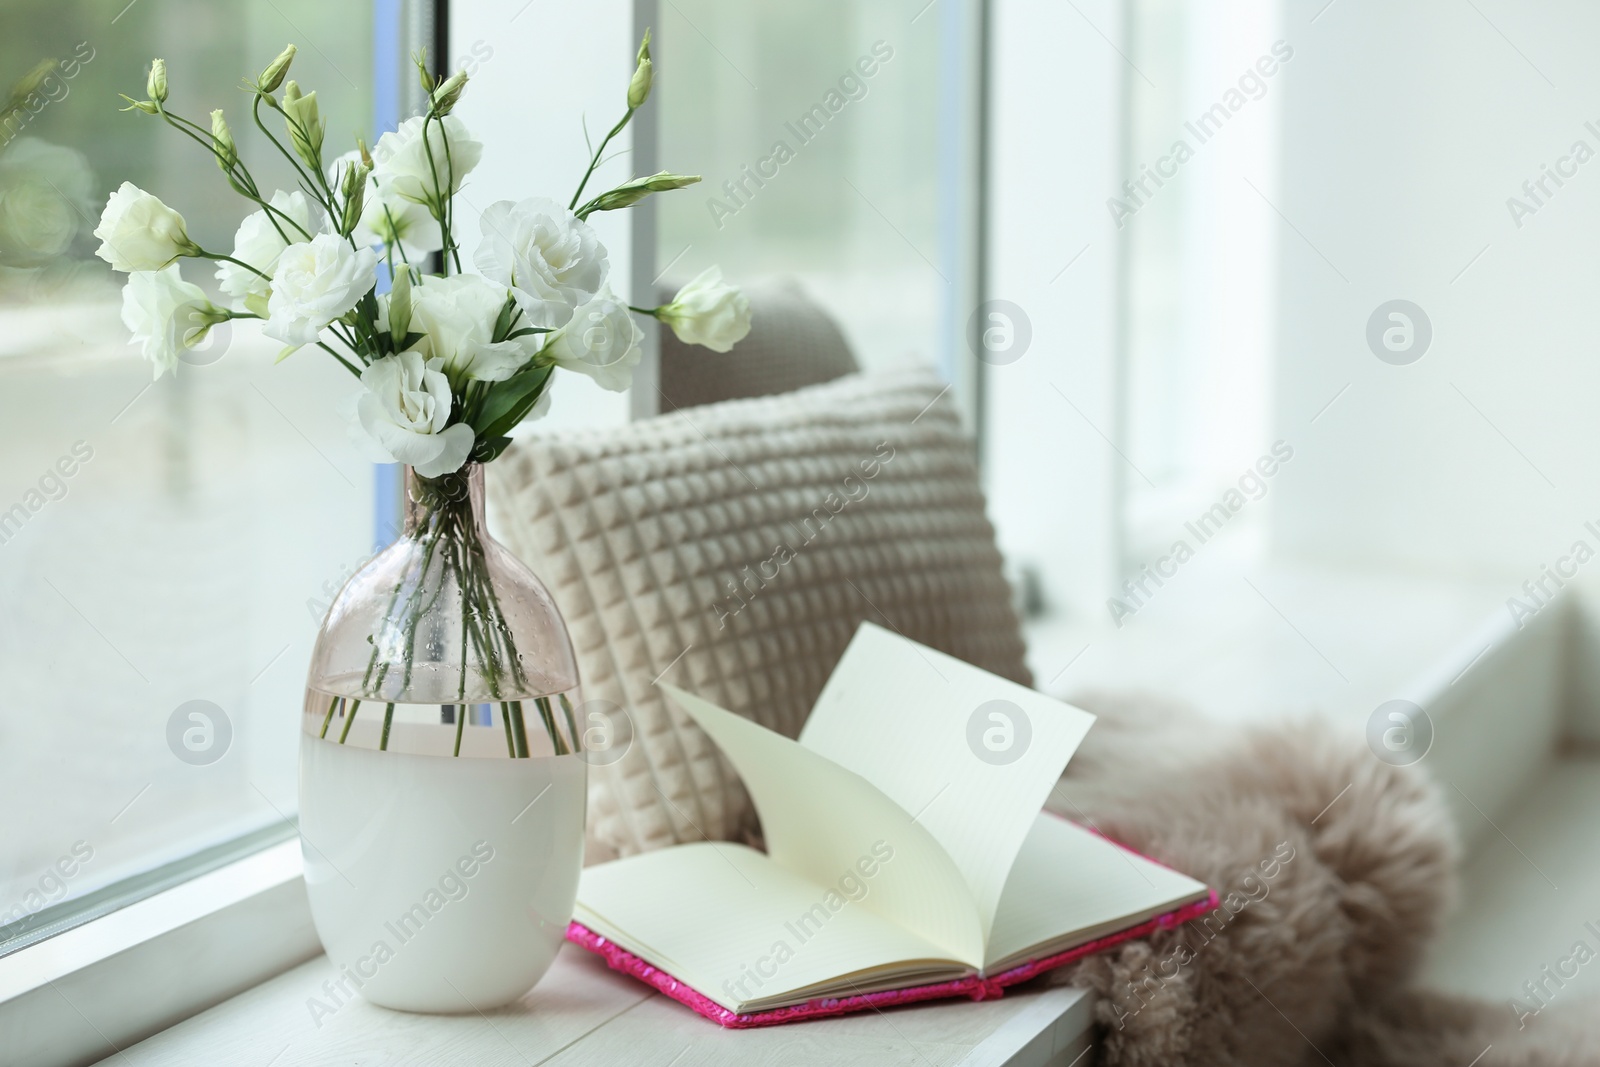 Photo of Stylish vase with fresh flowers and book on window sill